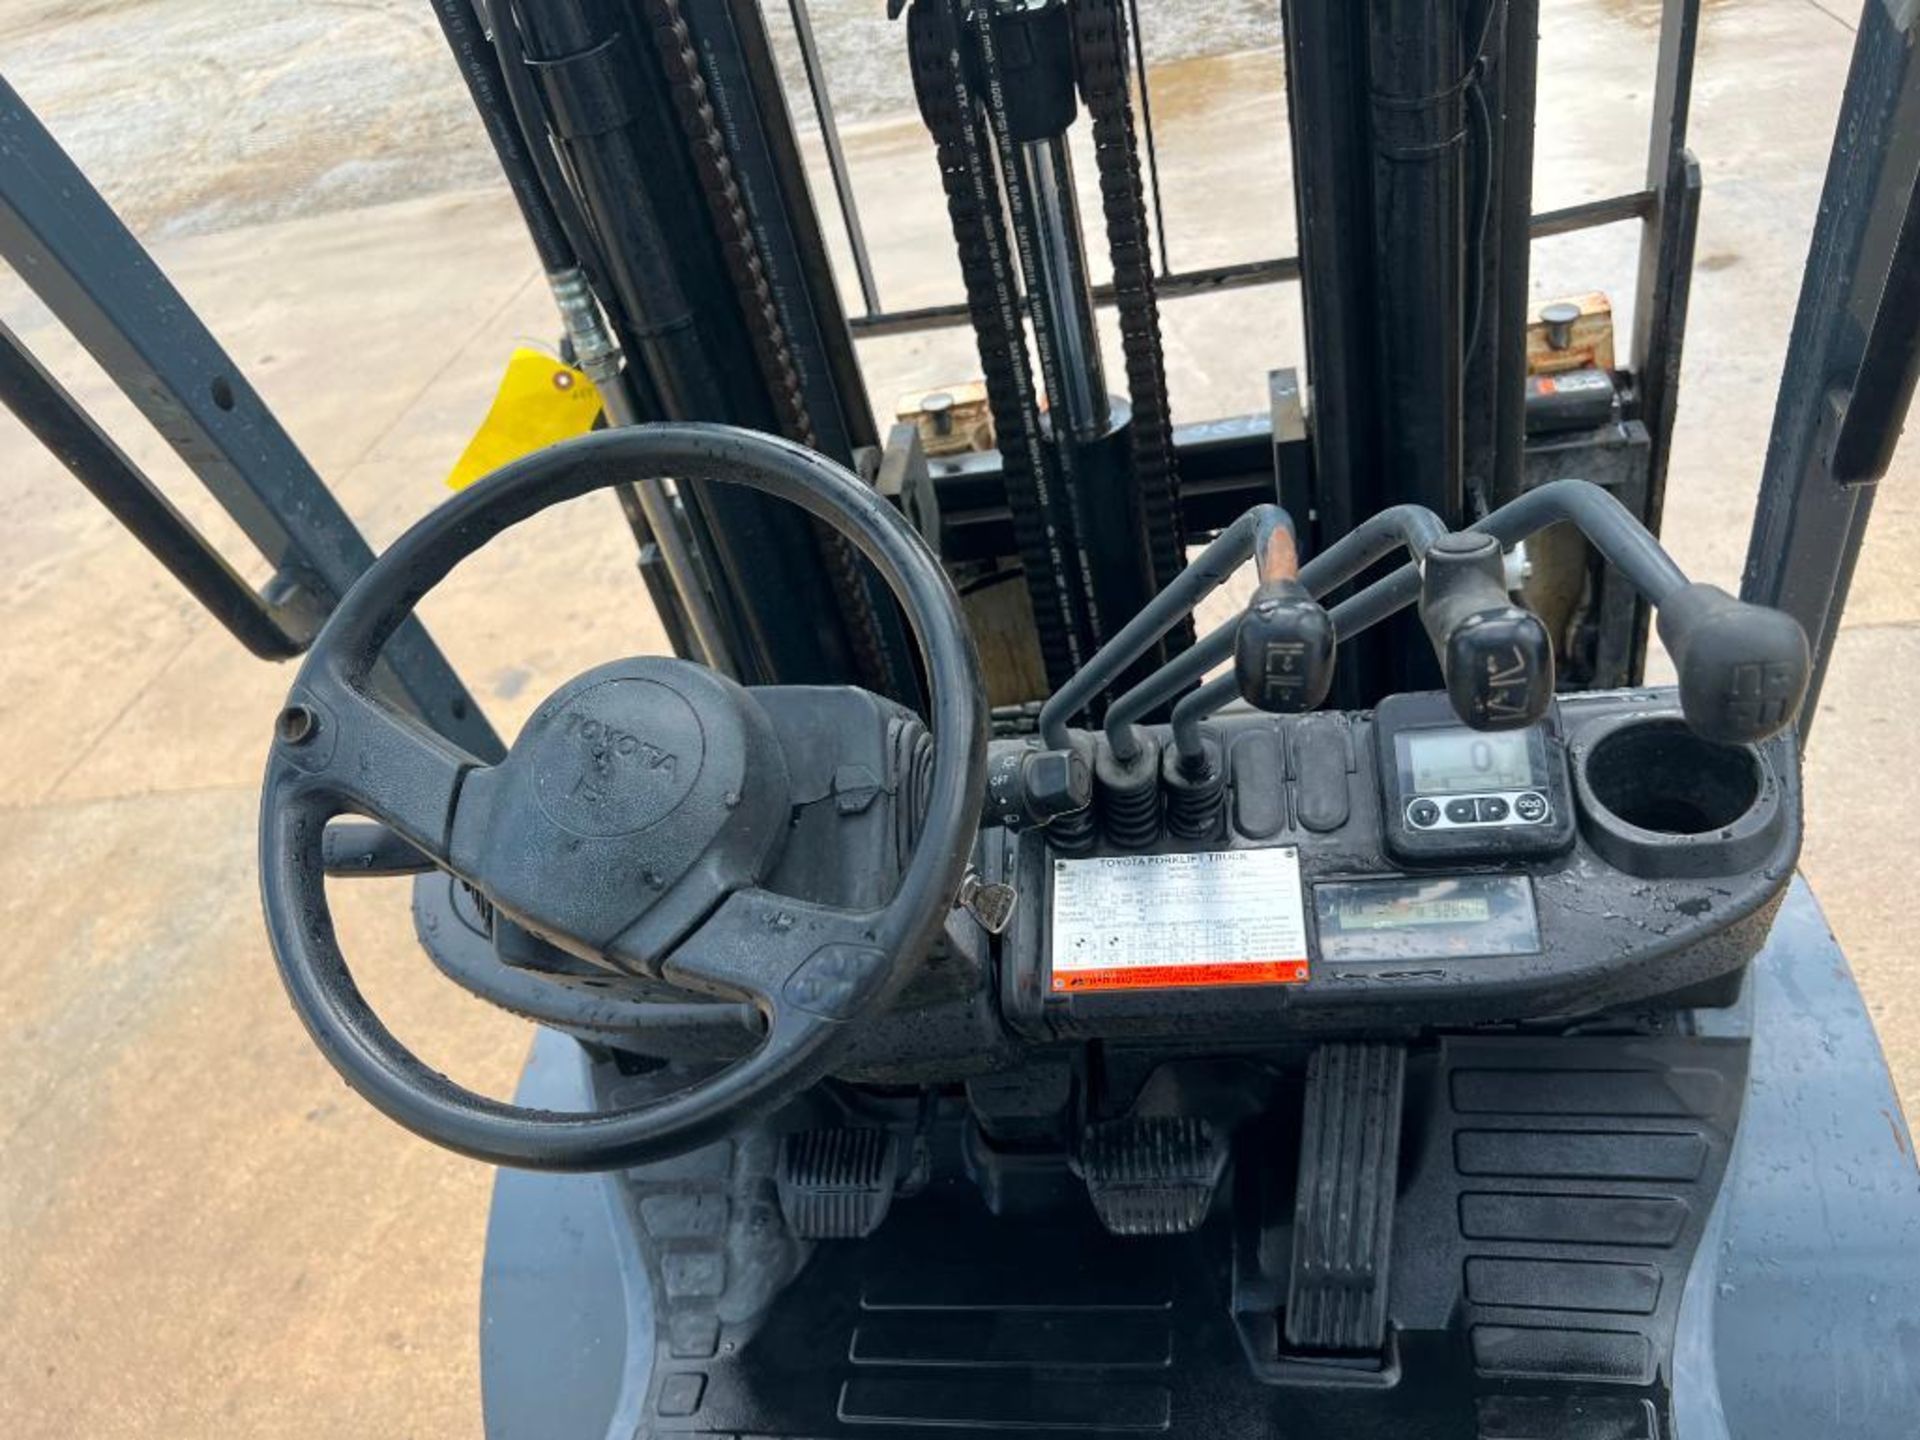 Toyota Forklift Truck, Model 8FGU25, Hours 5,264, LP. Located in Altamont, IL - Image 9 of 19